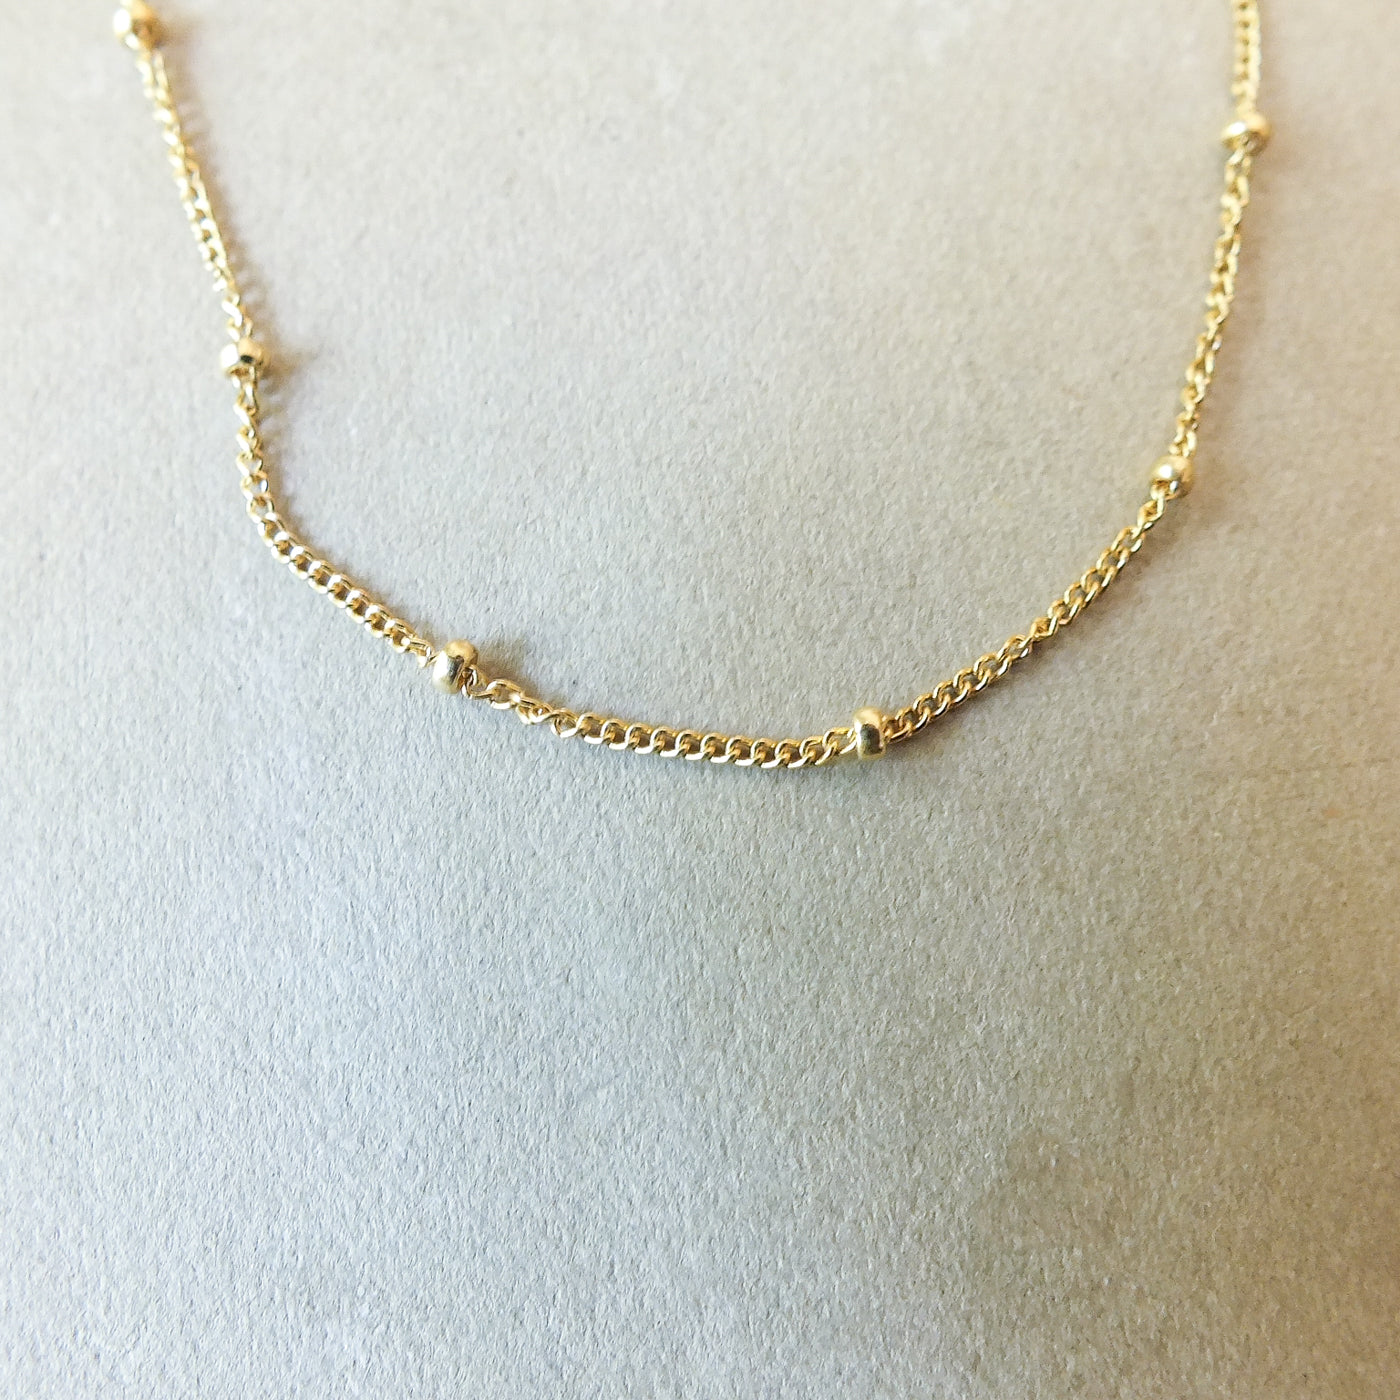 Satellite Chain Necklace by Becoming Jewelry on a white surface.